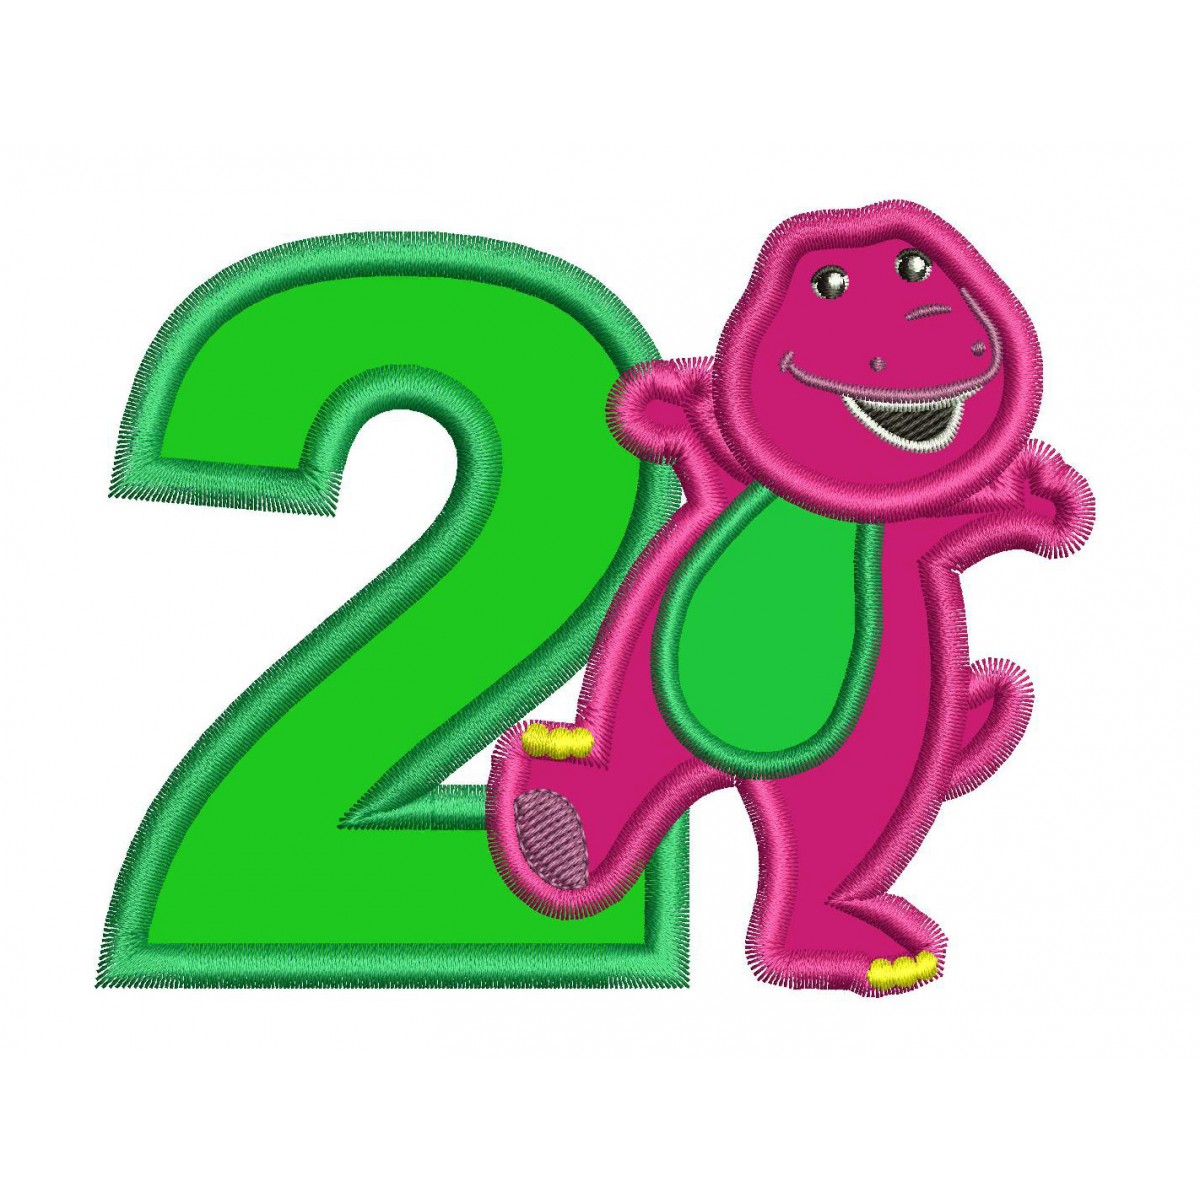 happy 2nd birthday barney images